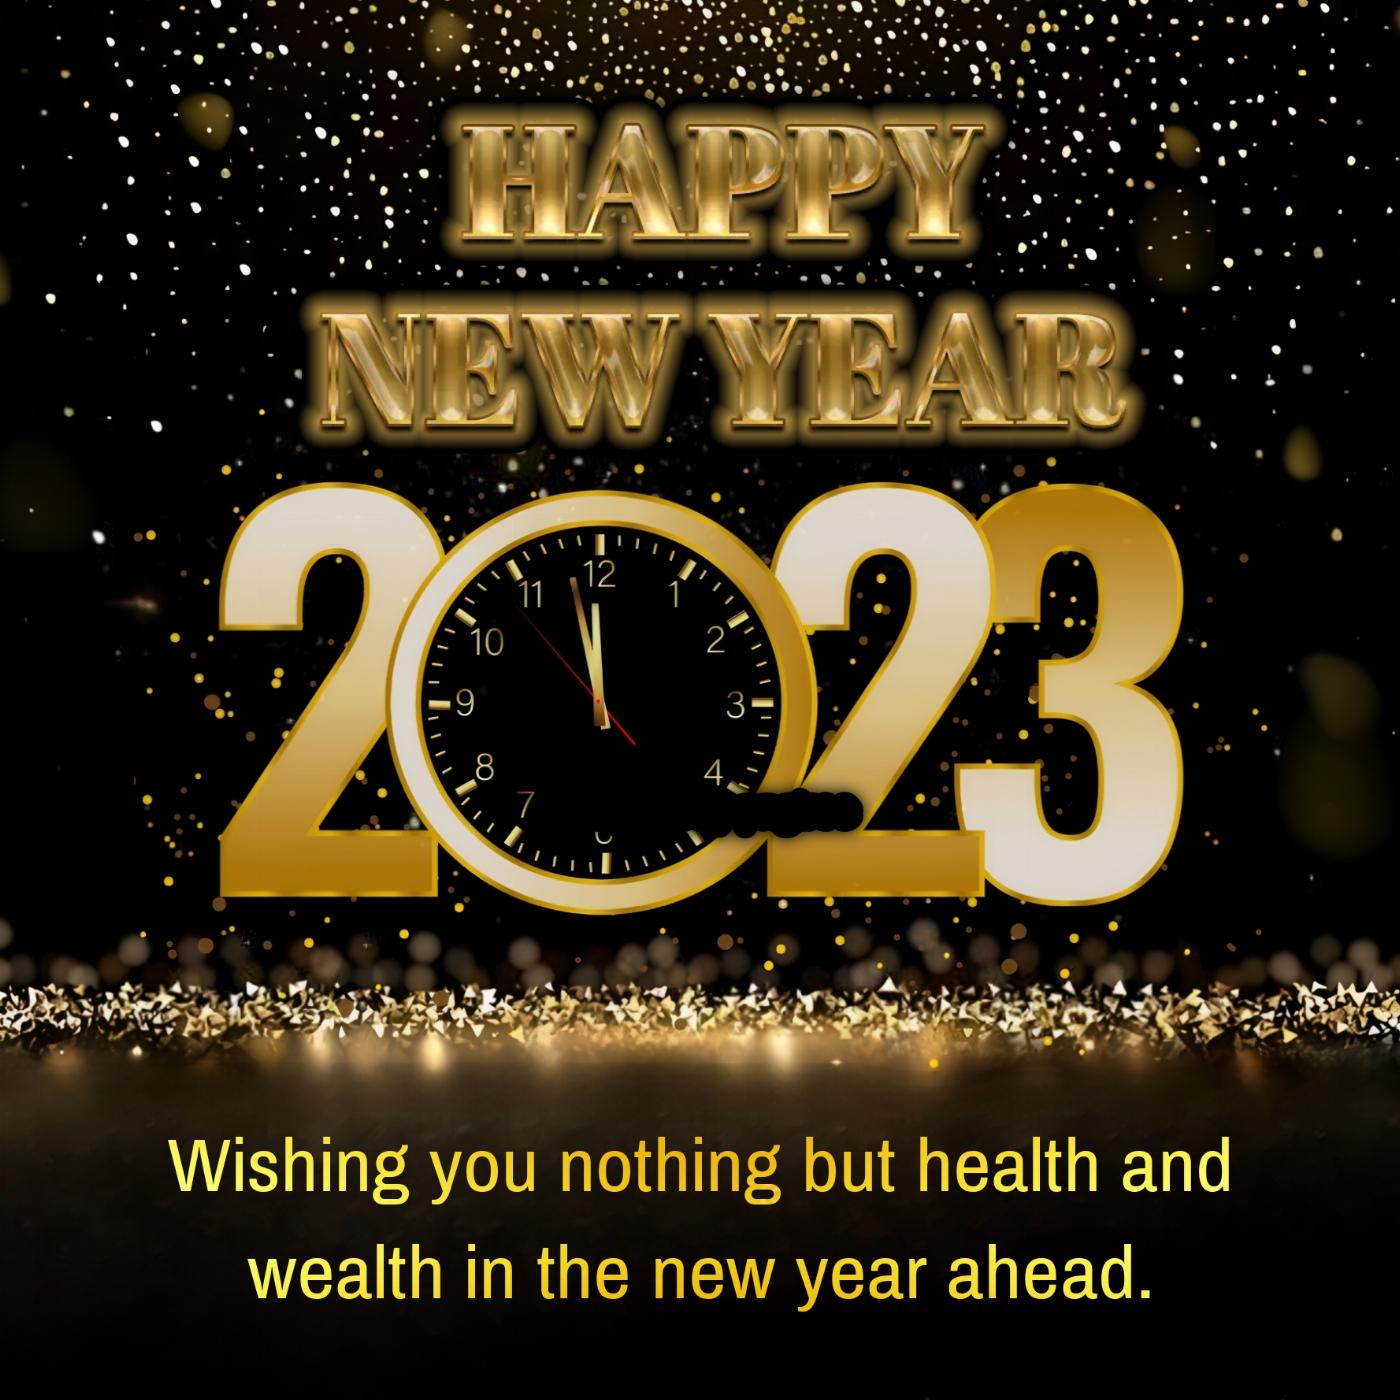 Wishing you nothing but health and wealth in the new year ahead